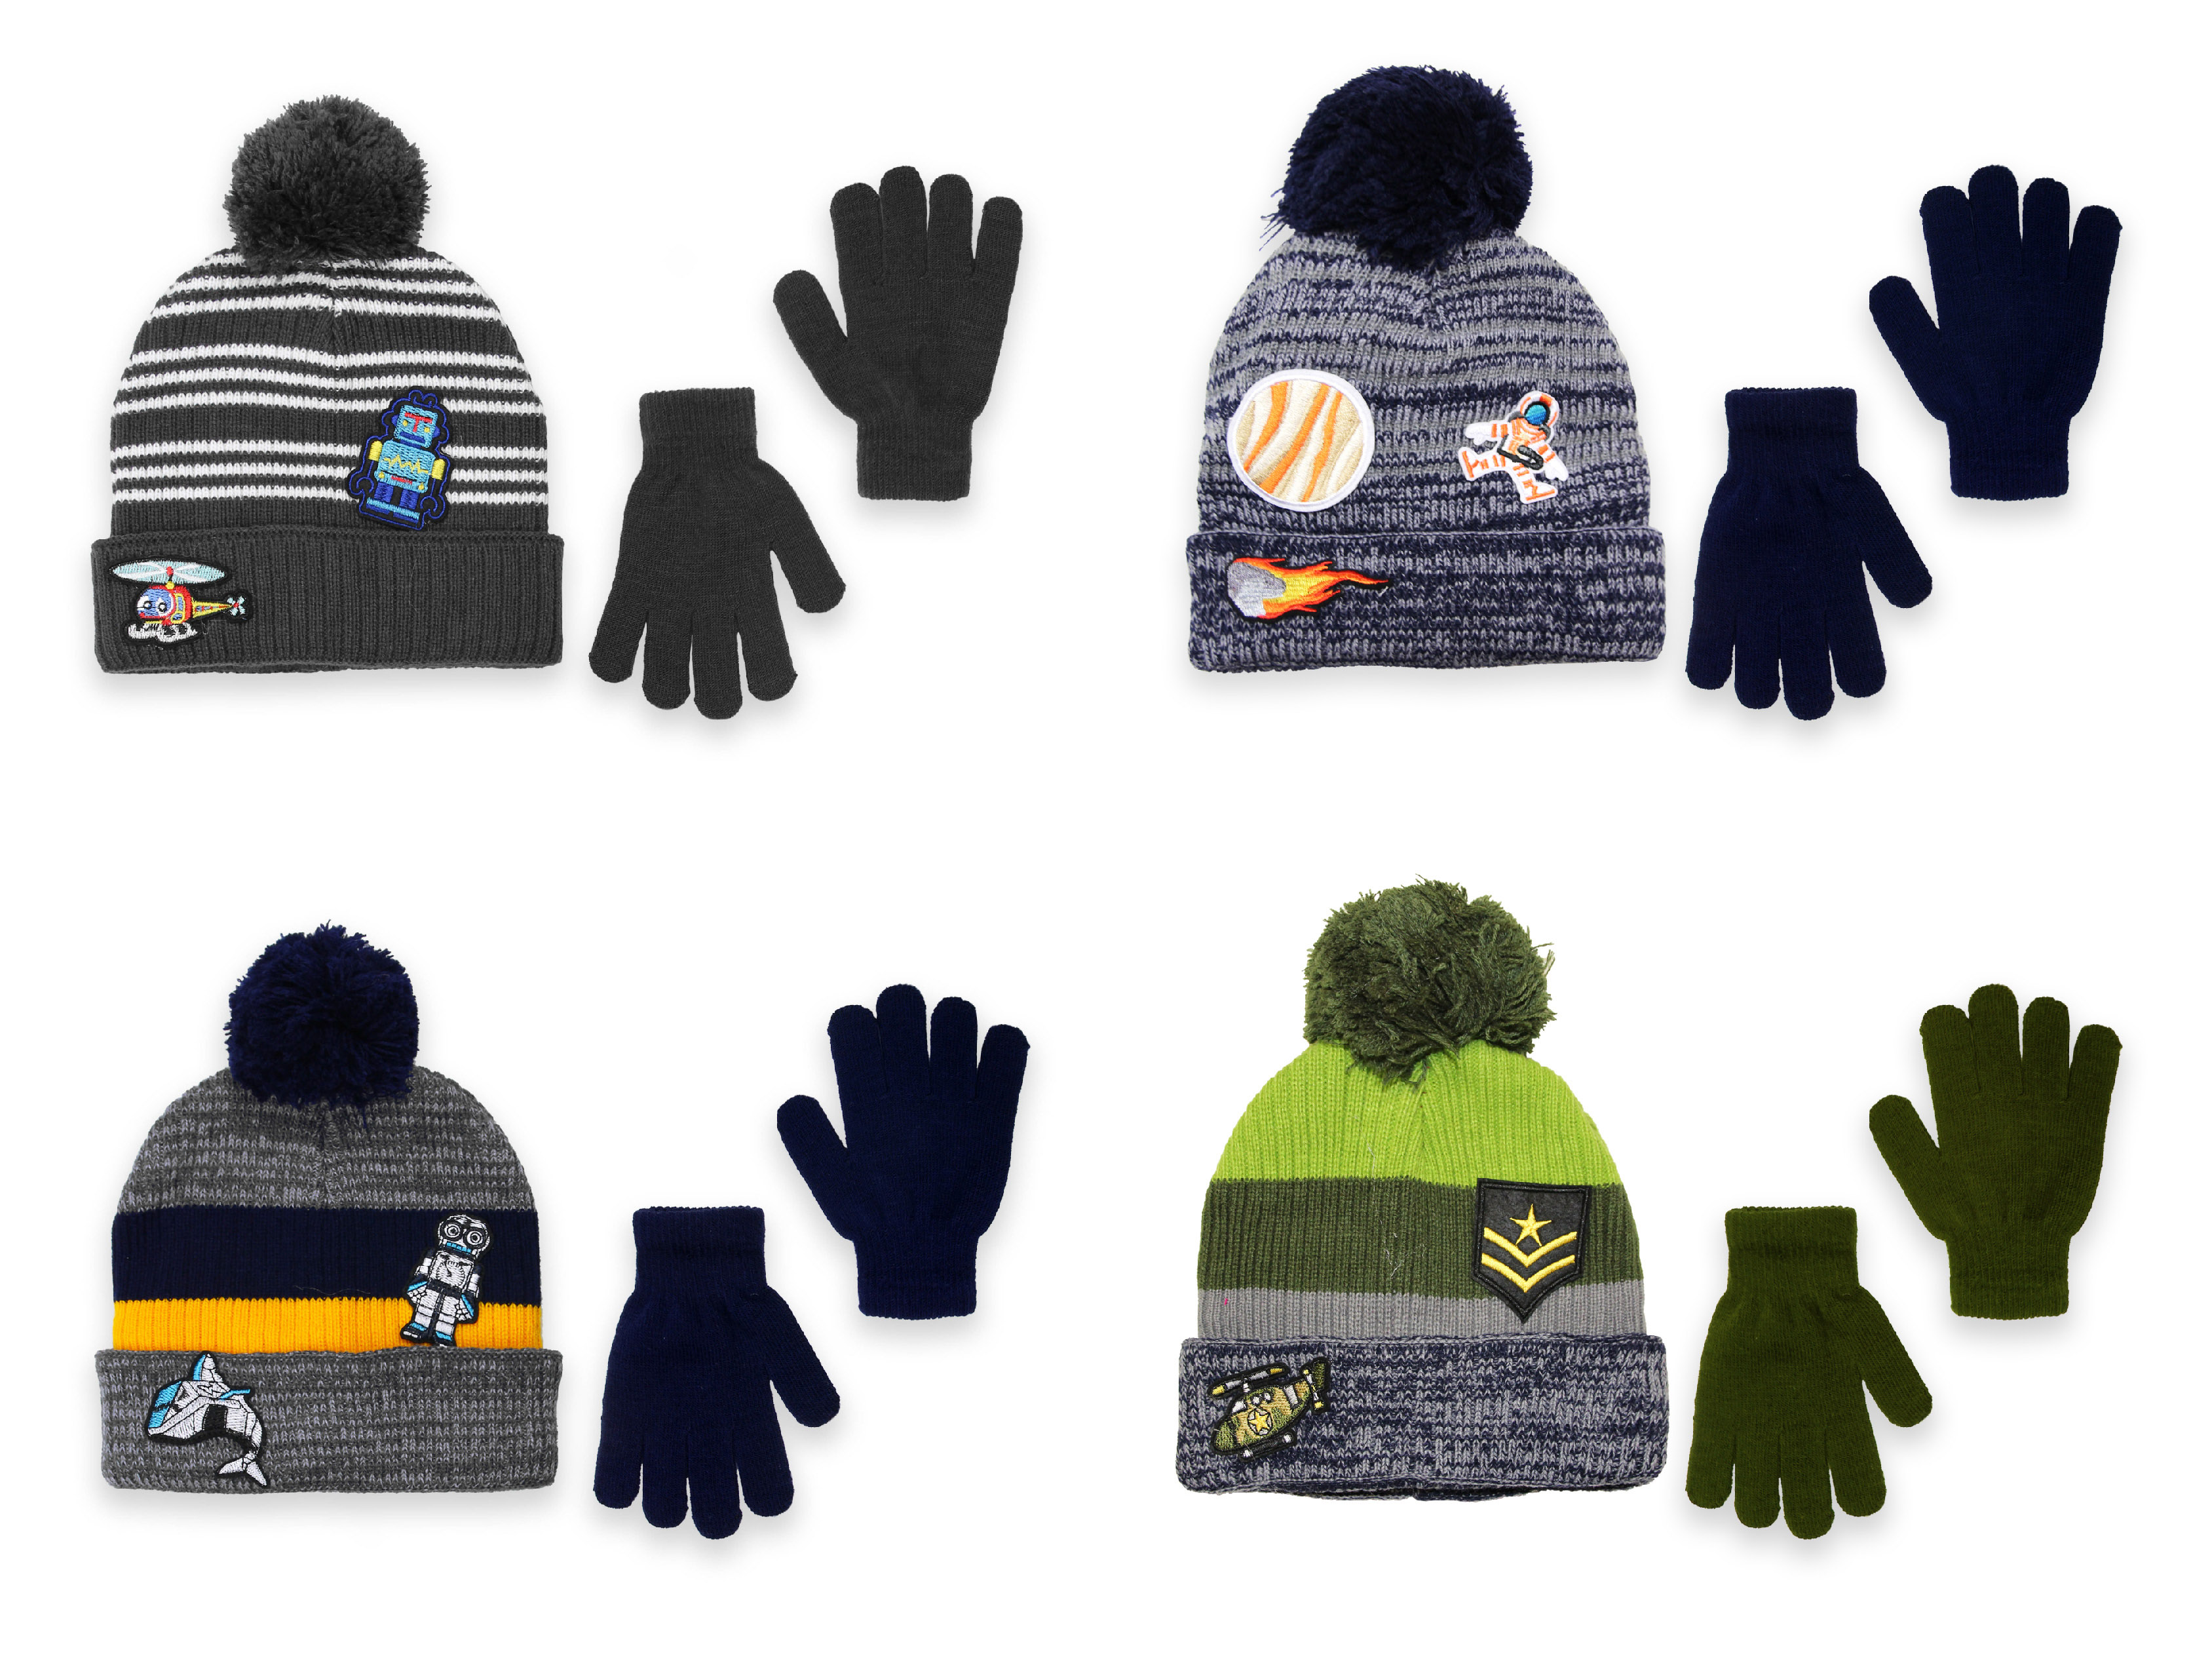 Boy's & Teen's Premium Knit Winter Hats & Gloves Sets w/ Embroidered PATCHES